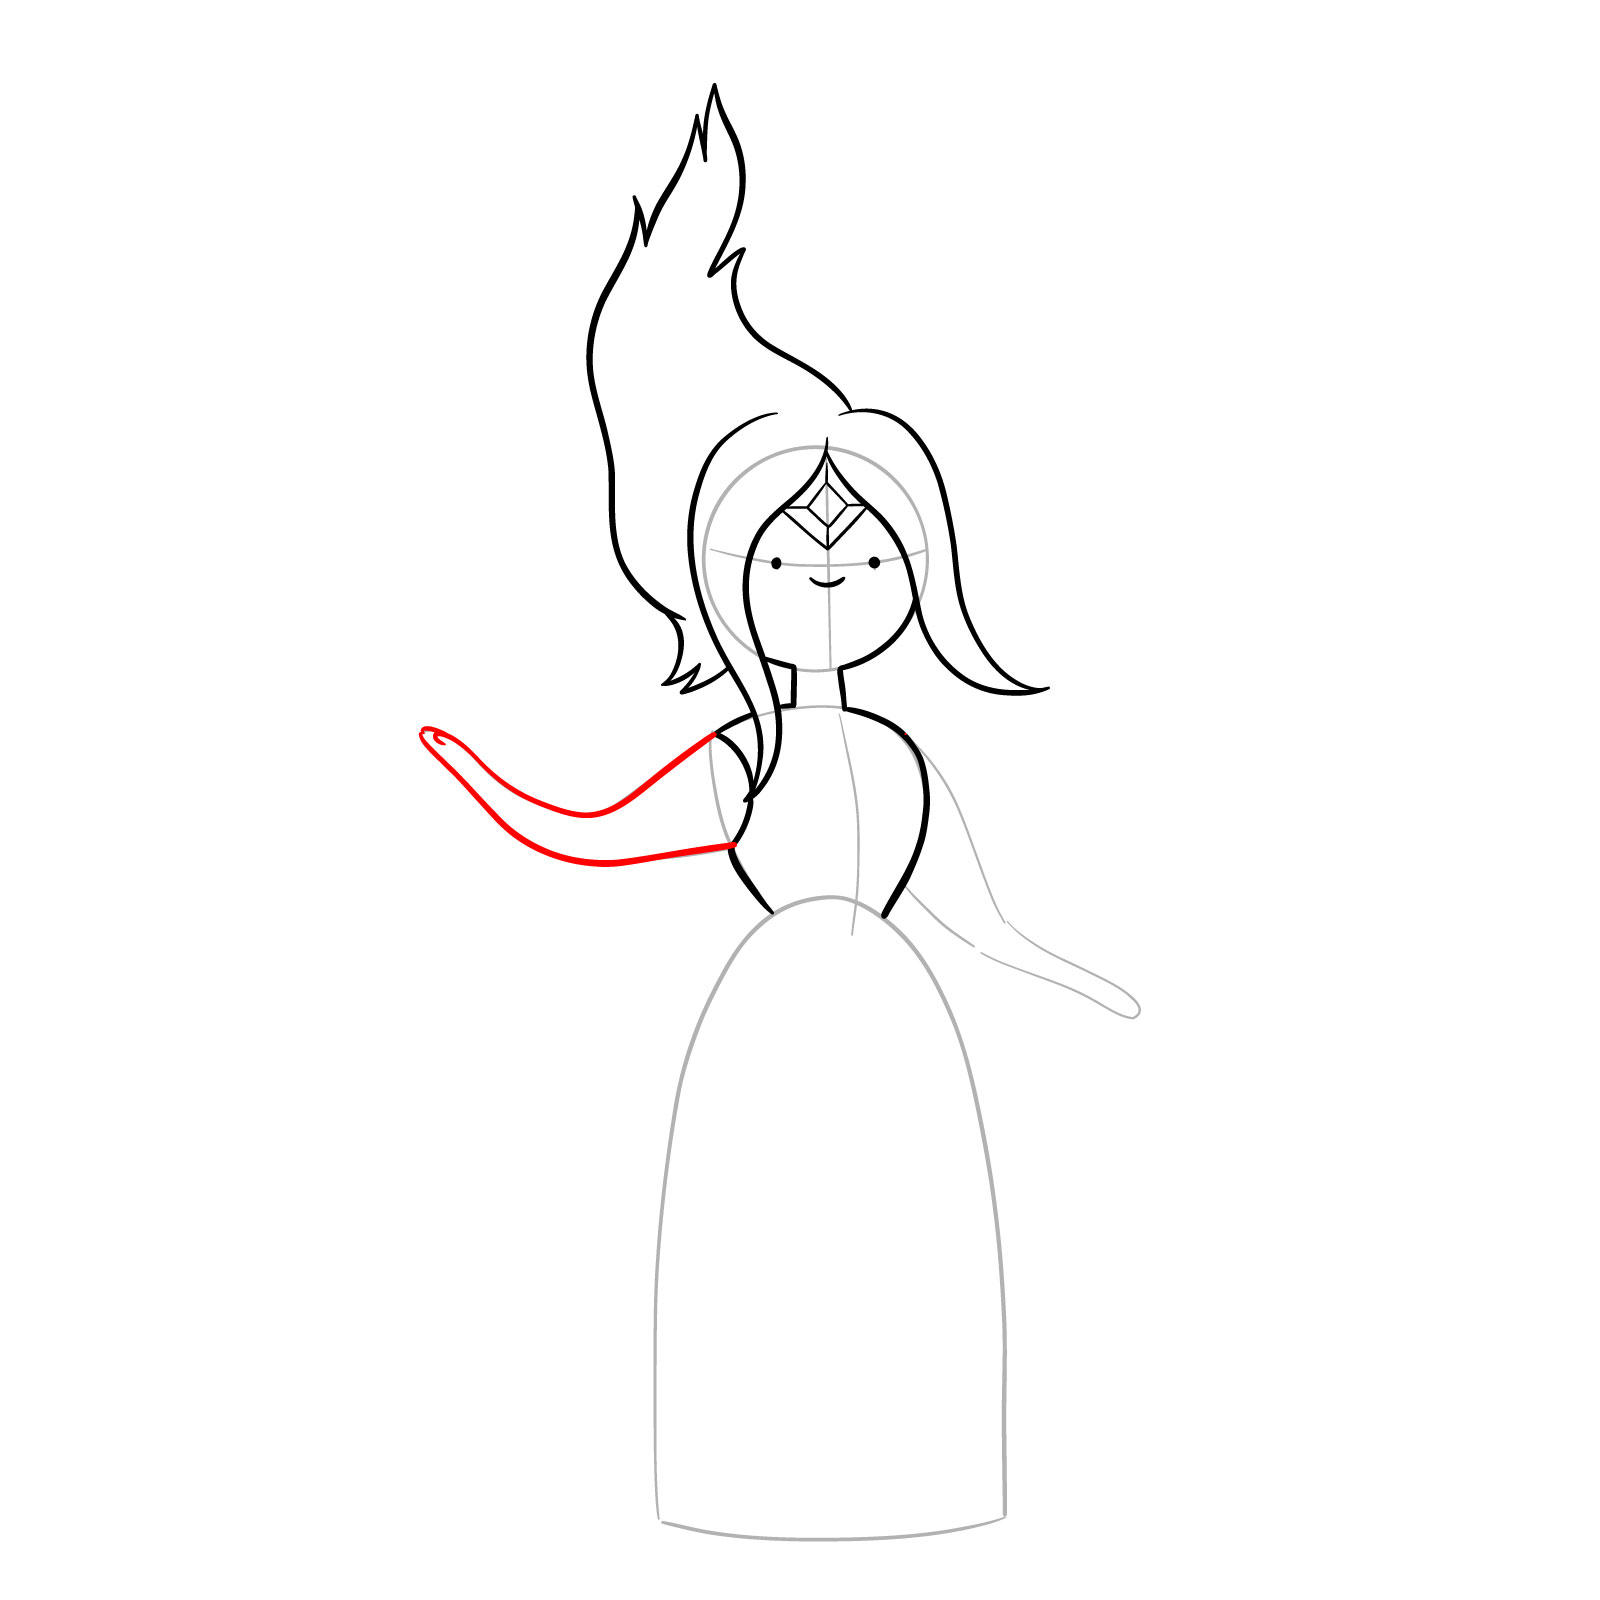 How to draw Flame Princess from Incendium Episode - step 11